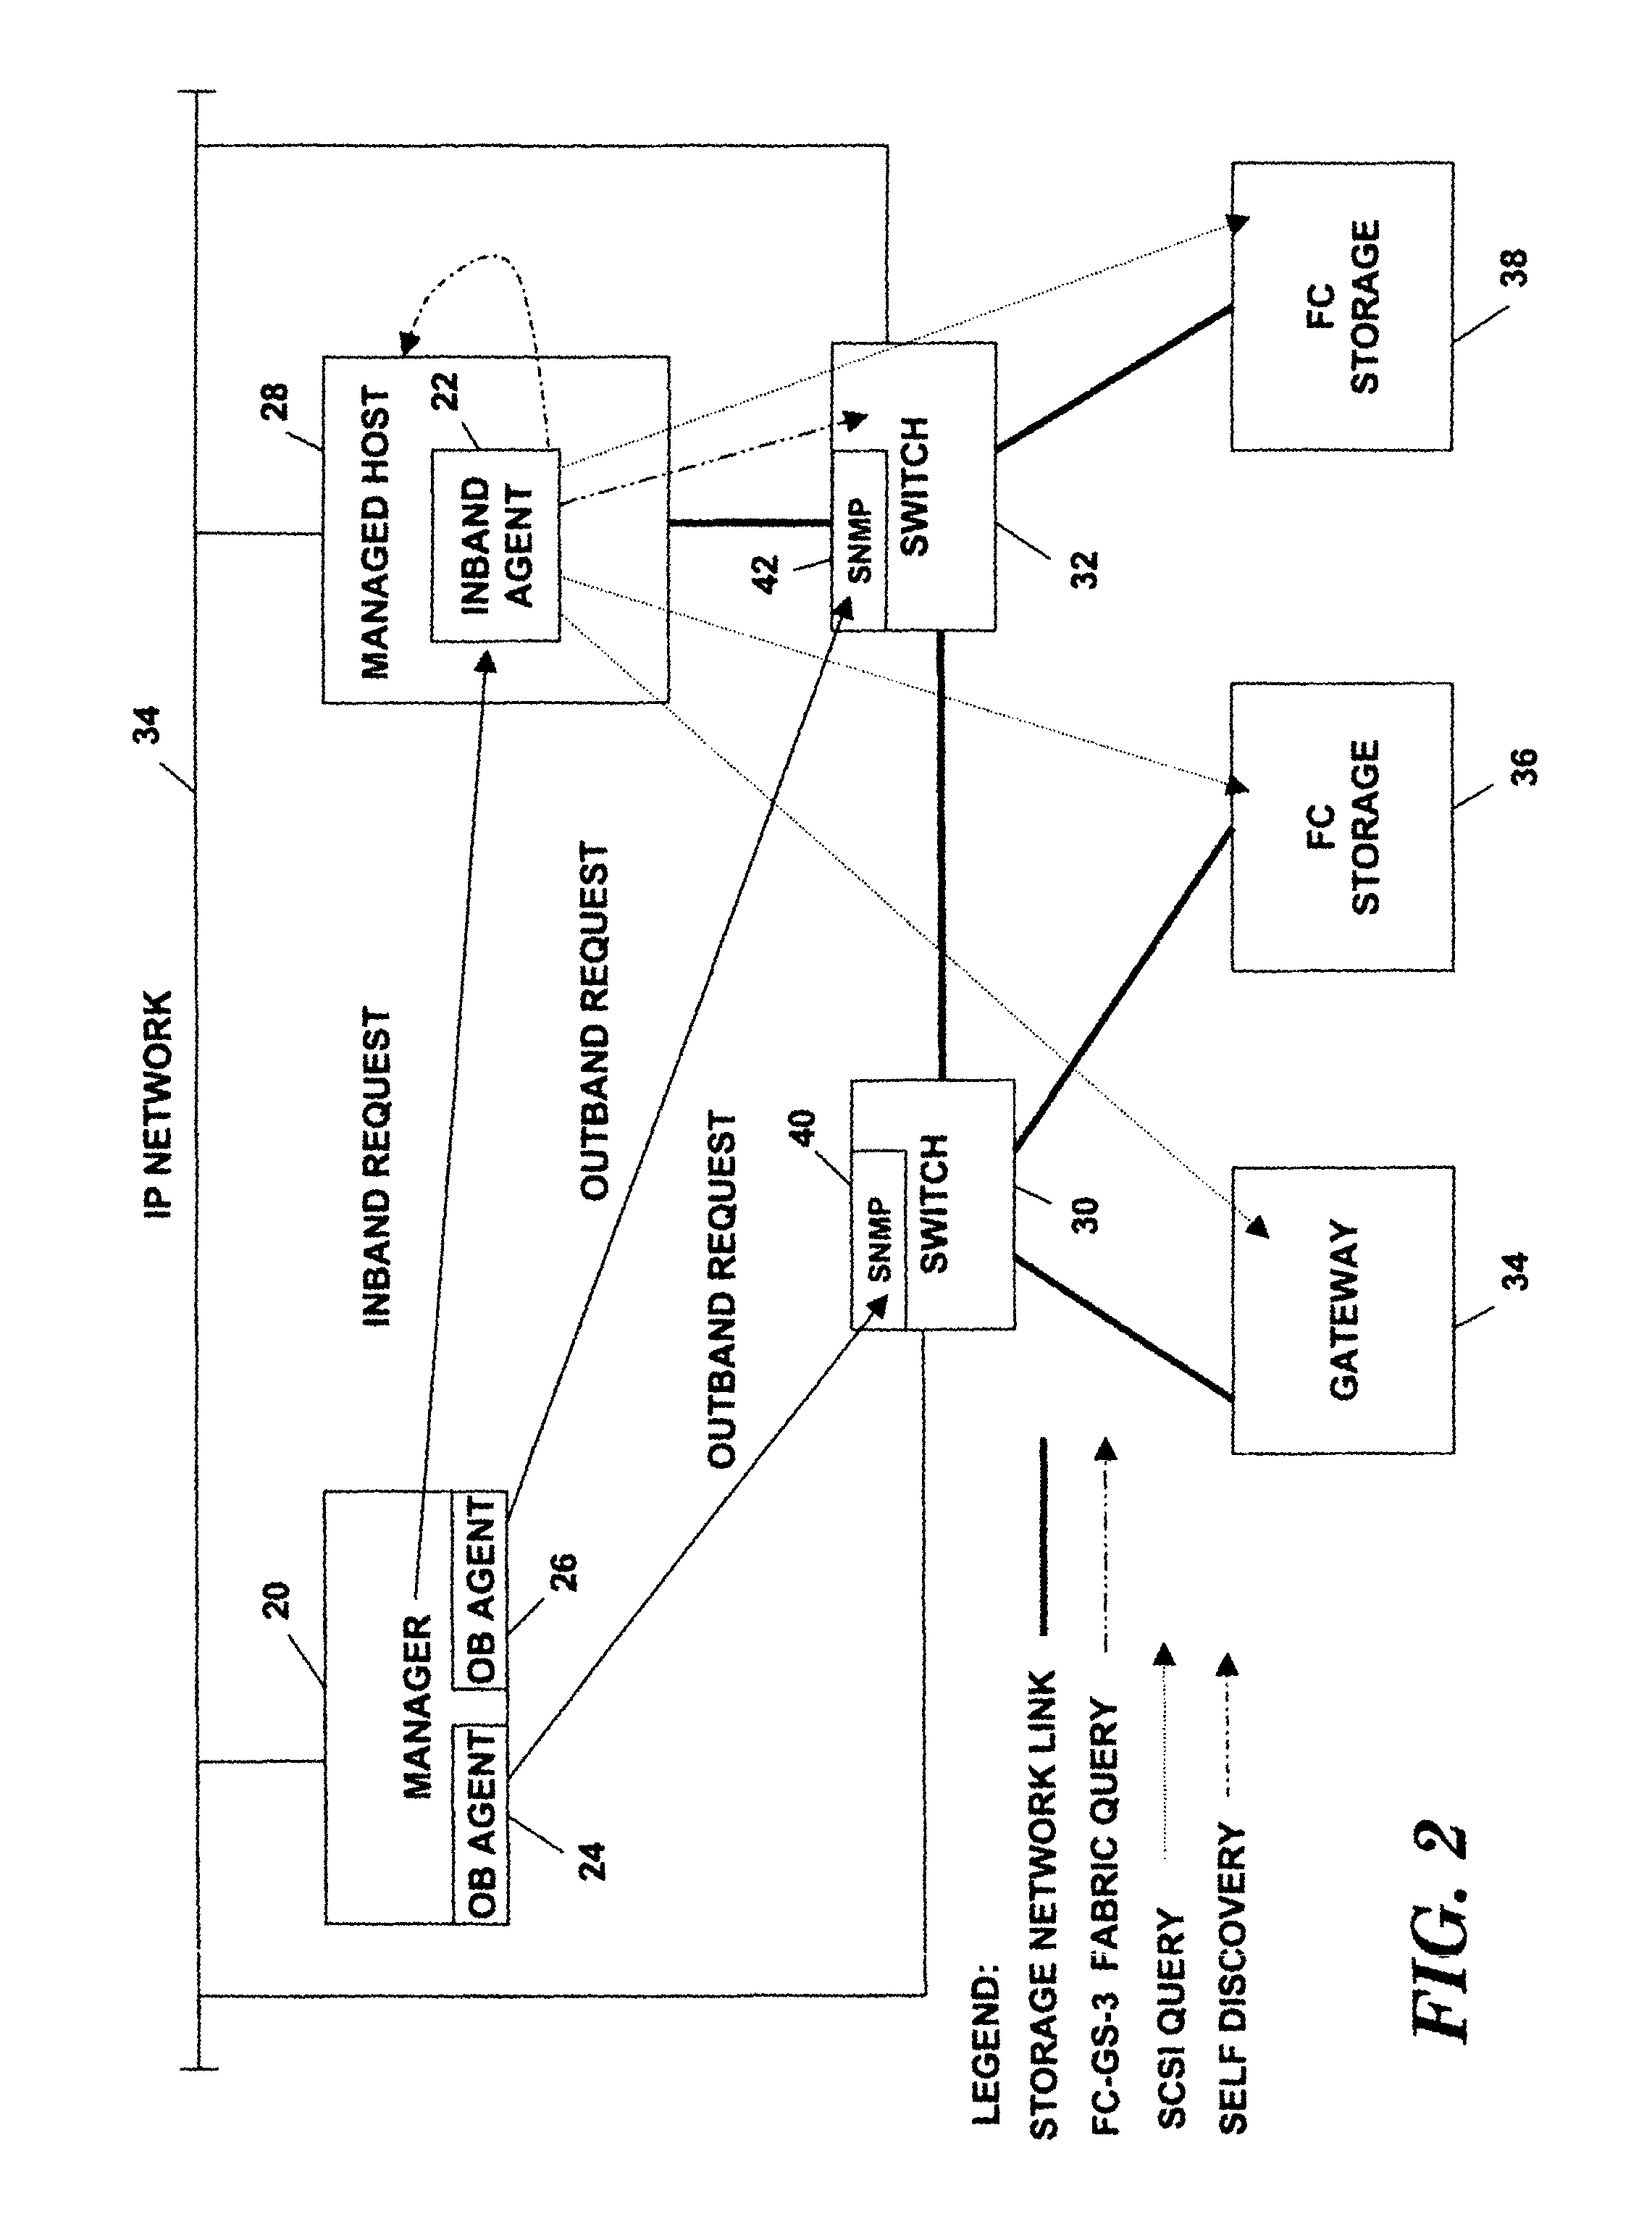 Intelligent discovery of network information from multiple information gathering agents